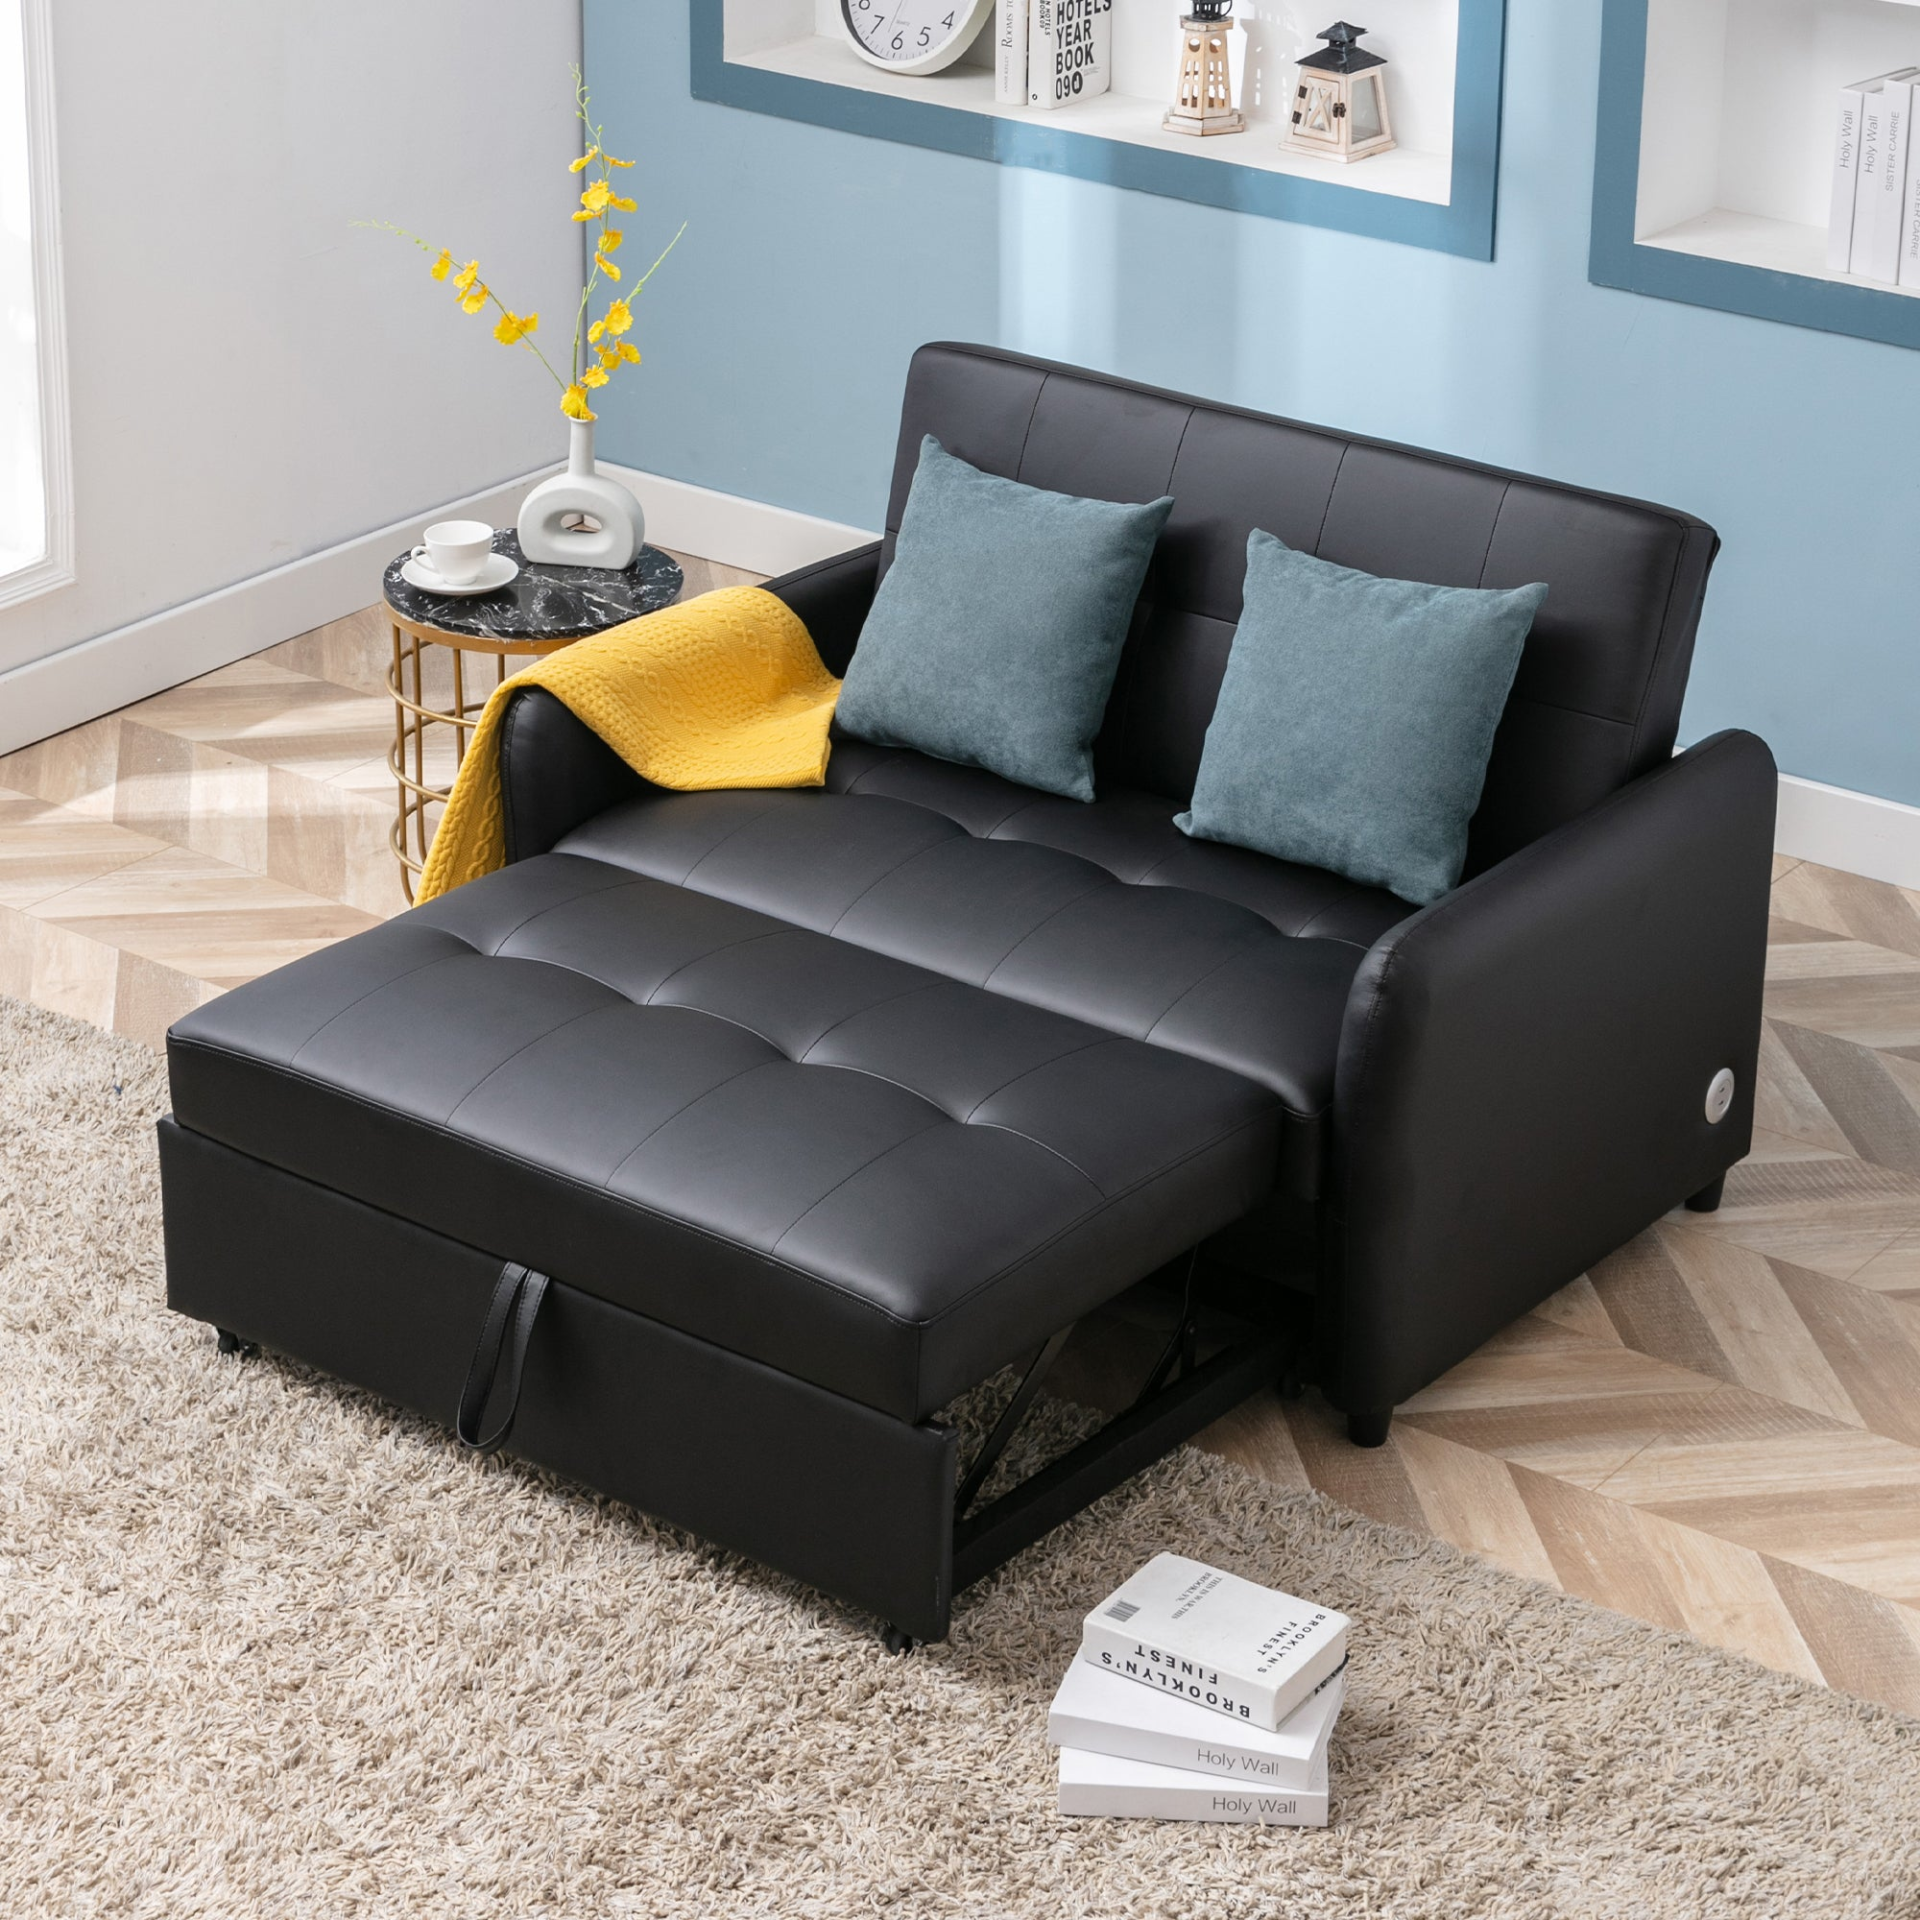 Black - Smart Rest Convertible Armchair Sofa Bed With Dual USB Ports (51.5")